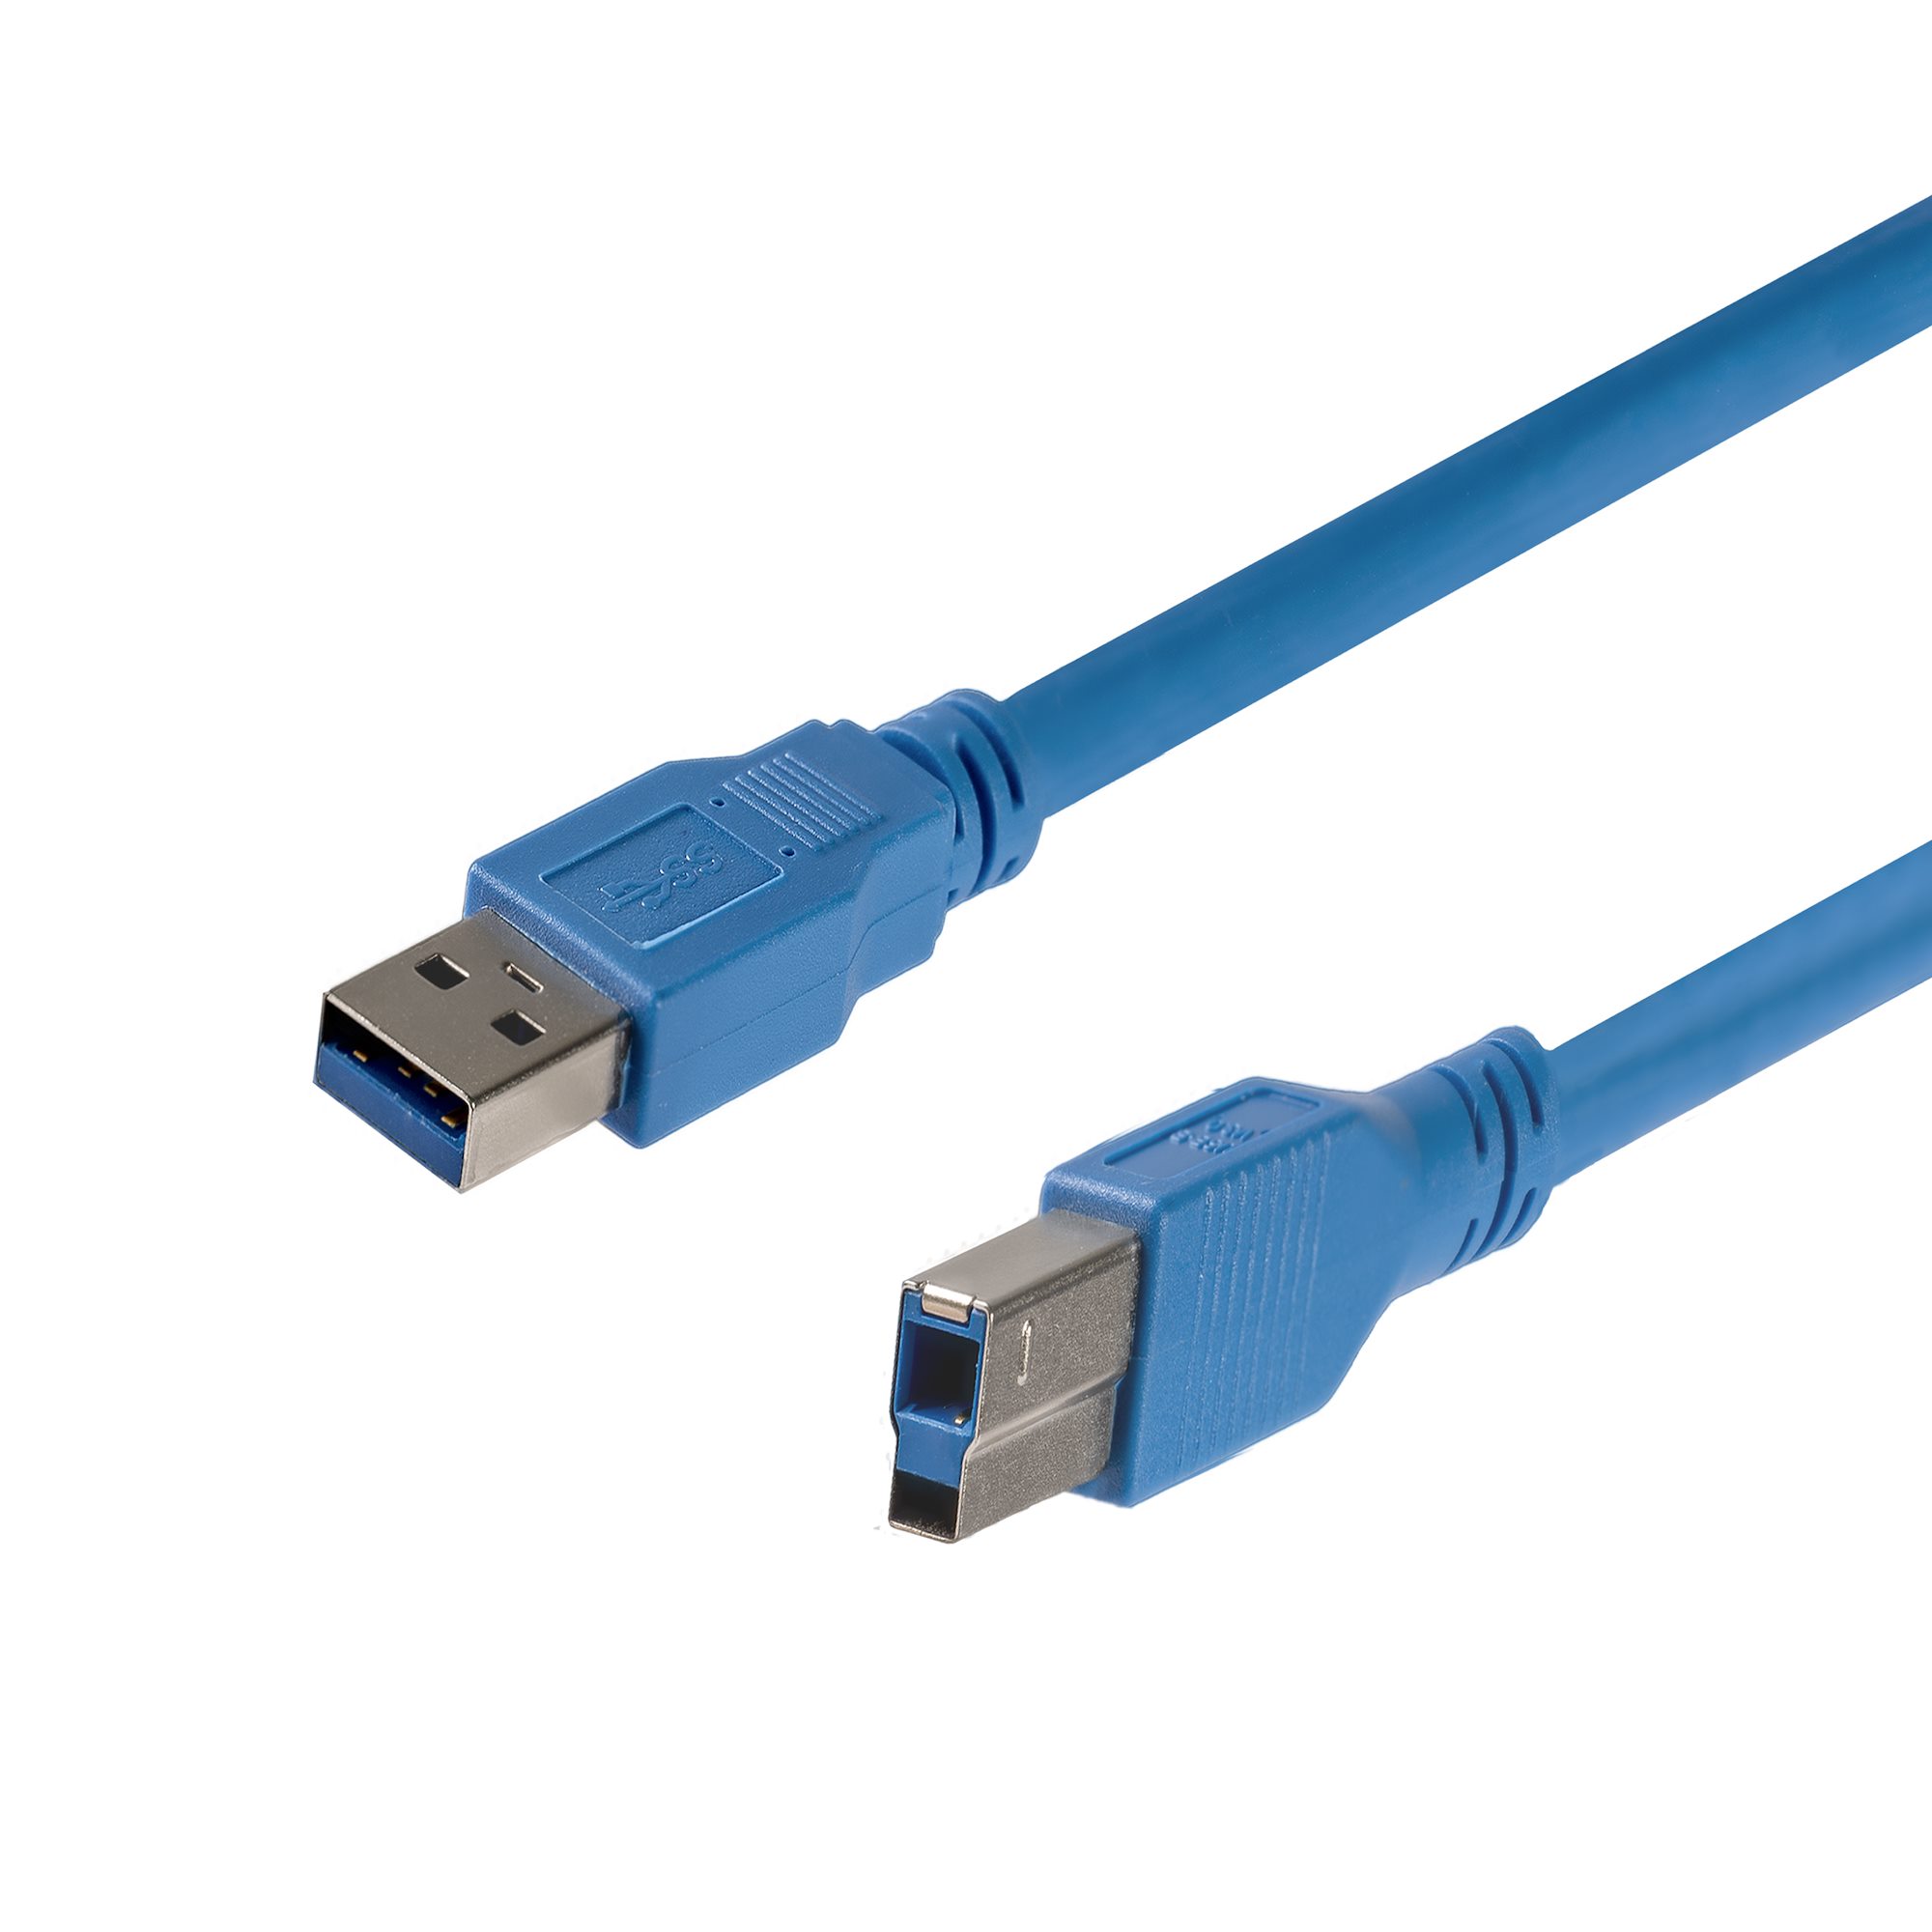 Vermenigvuldiging Gedragen Samengroeiing 1 ft SuperSpeed USB 3.0 Cable A to B M/M - USB 3.0 Cables | StarTech.com